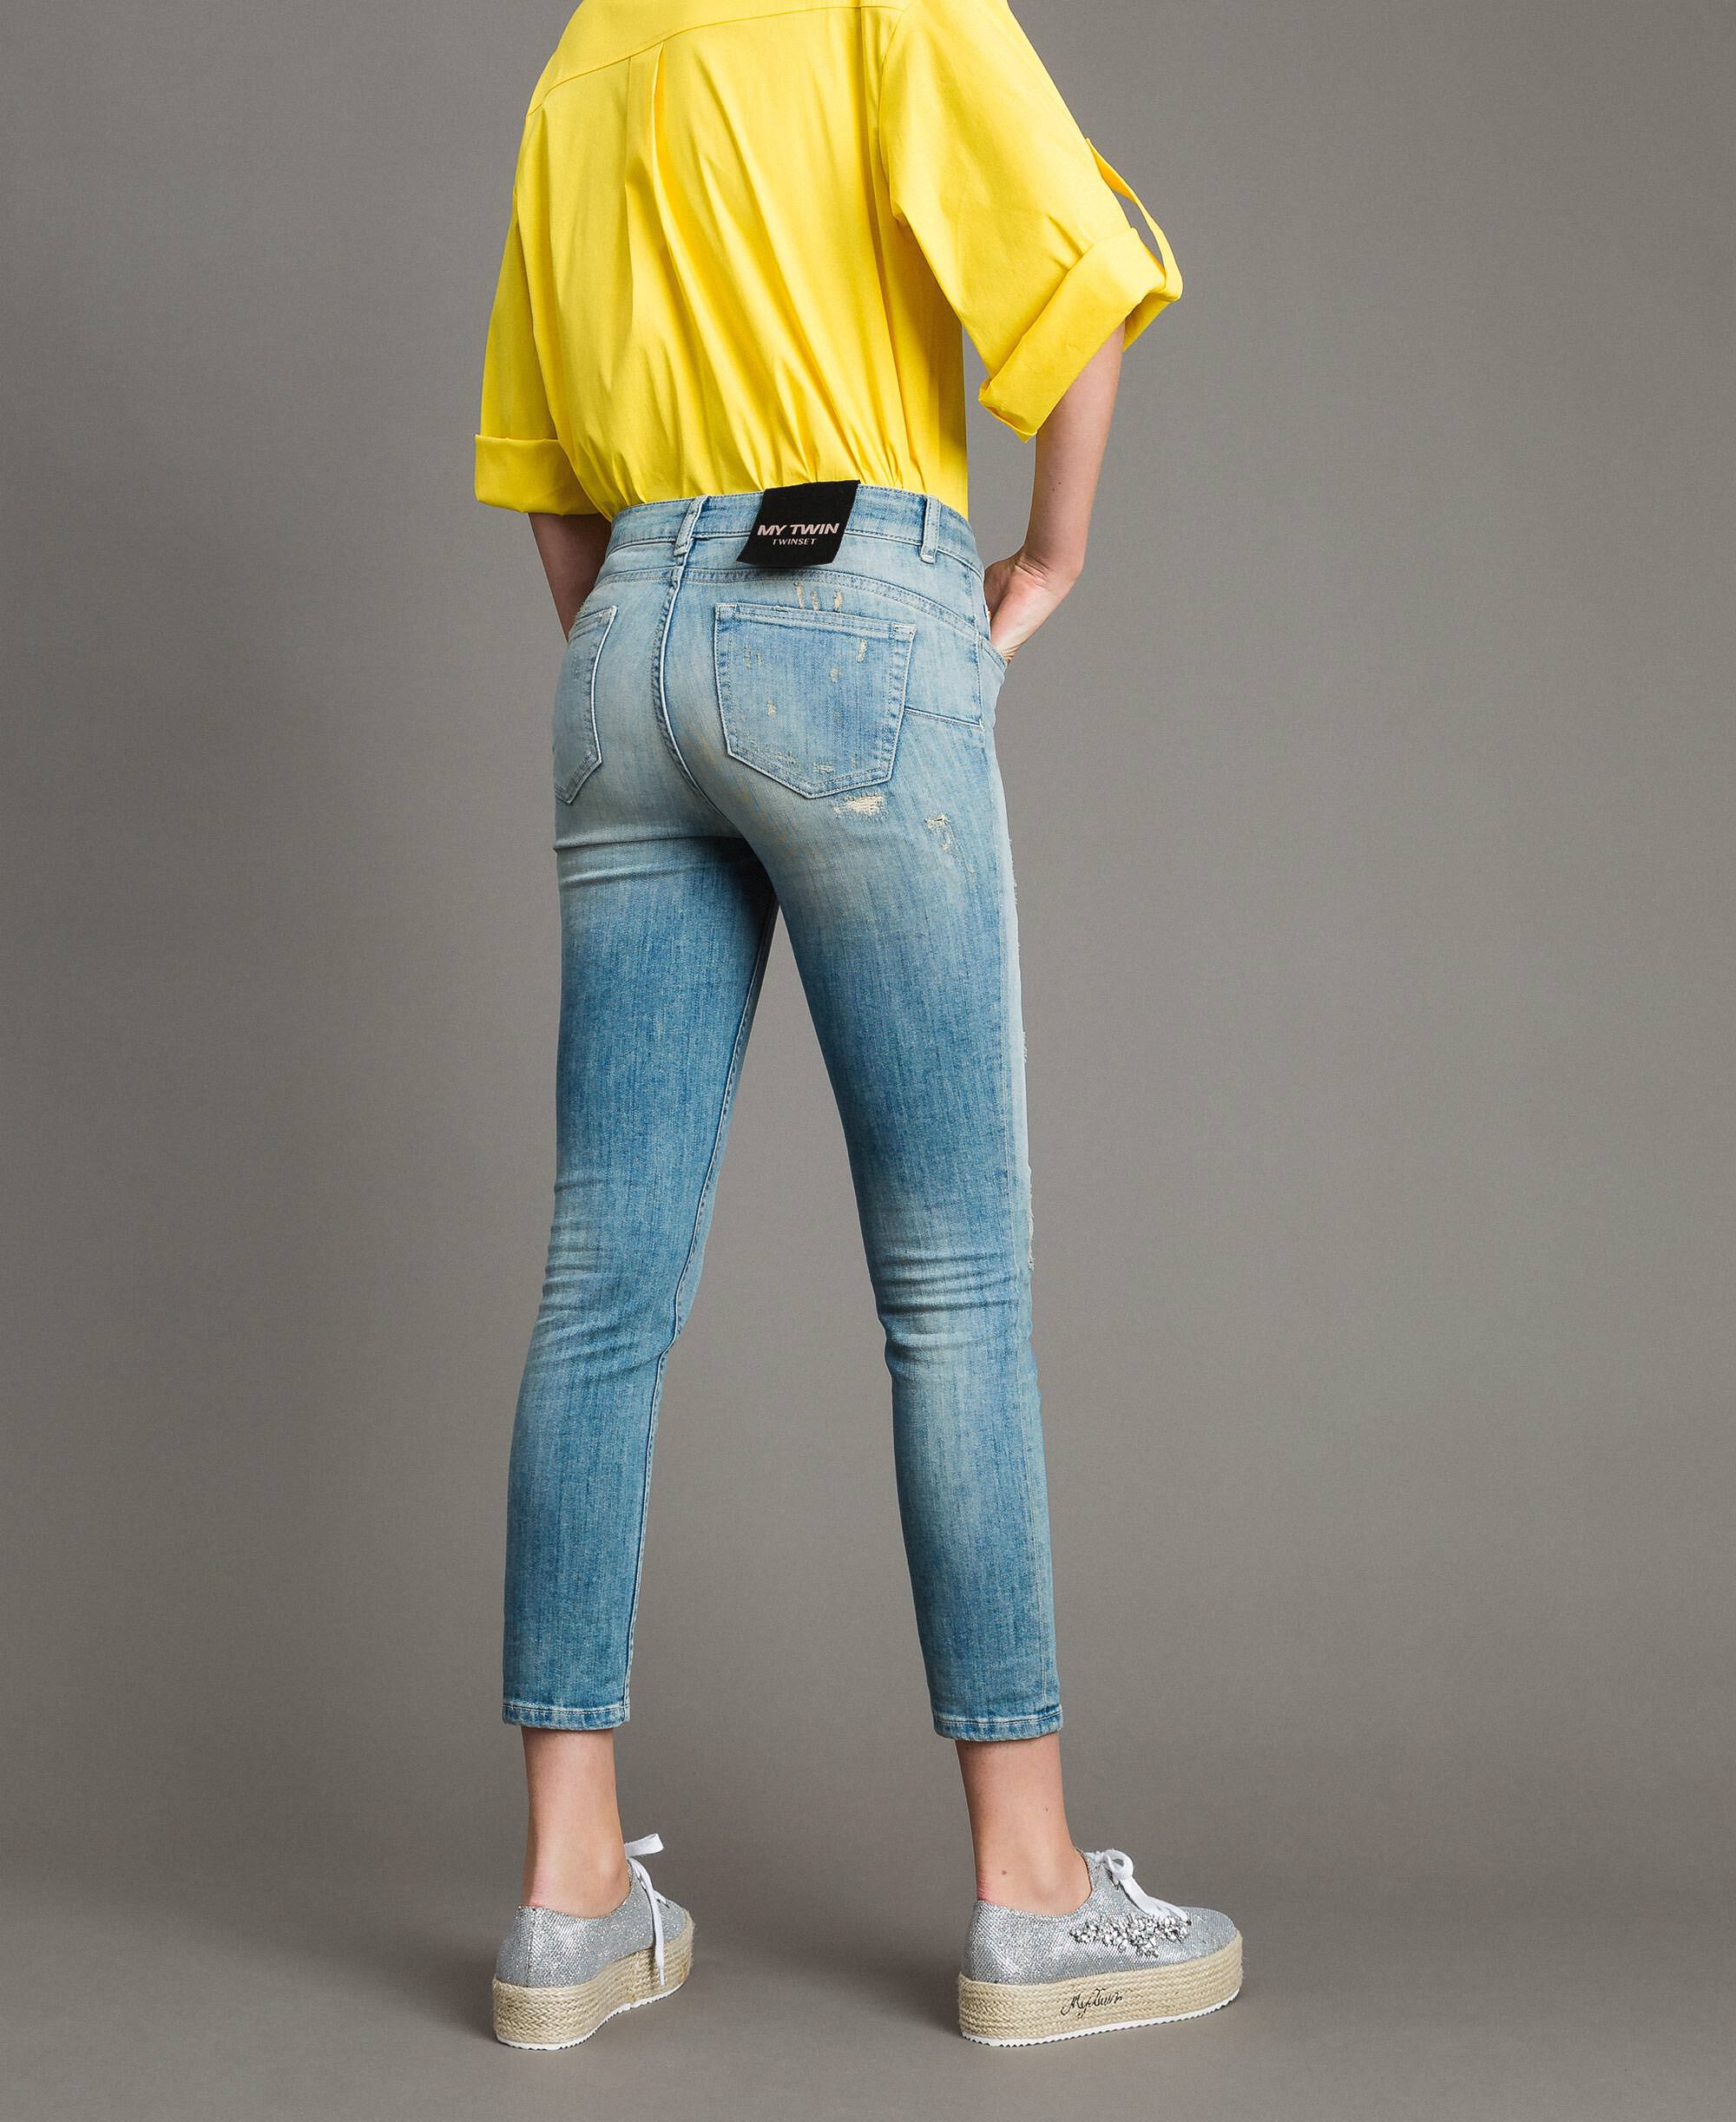 blue jeans with yellow rips